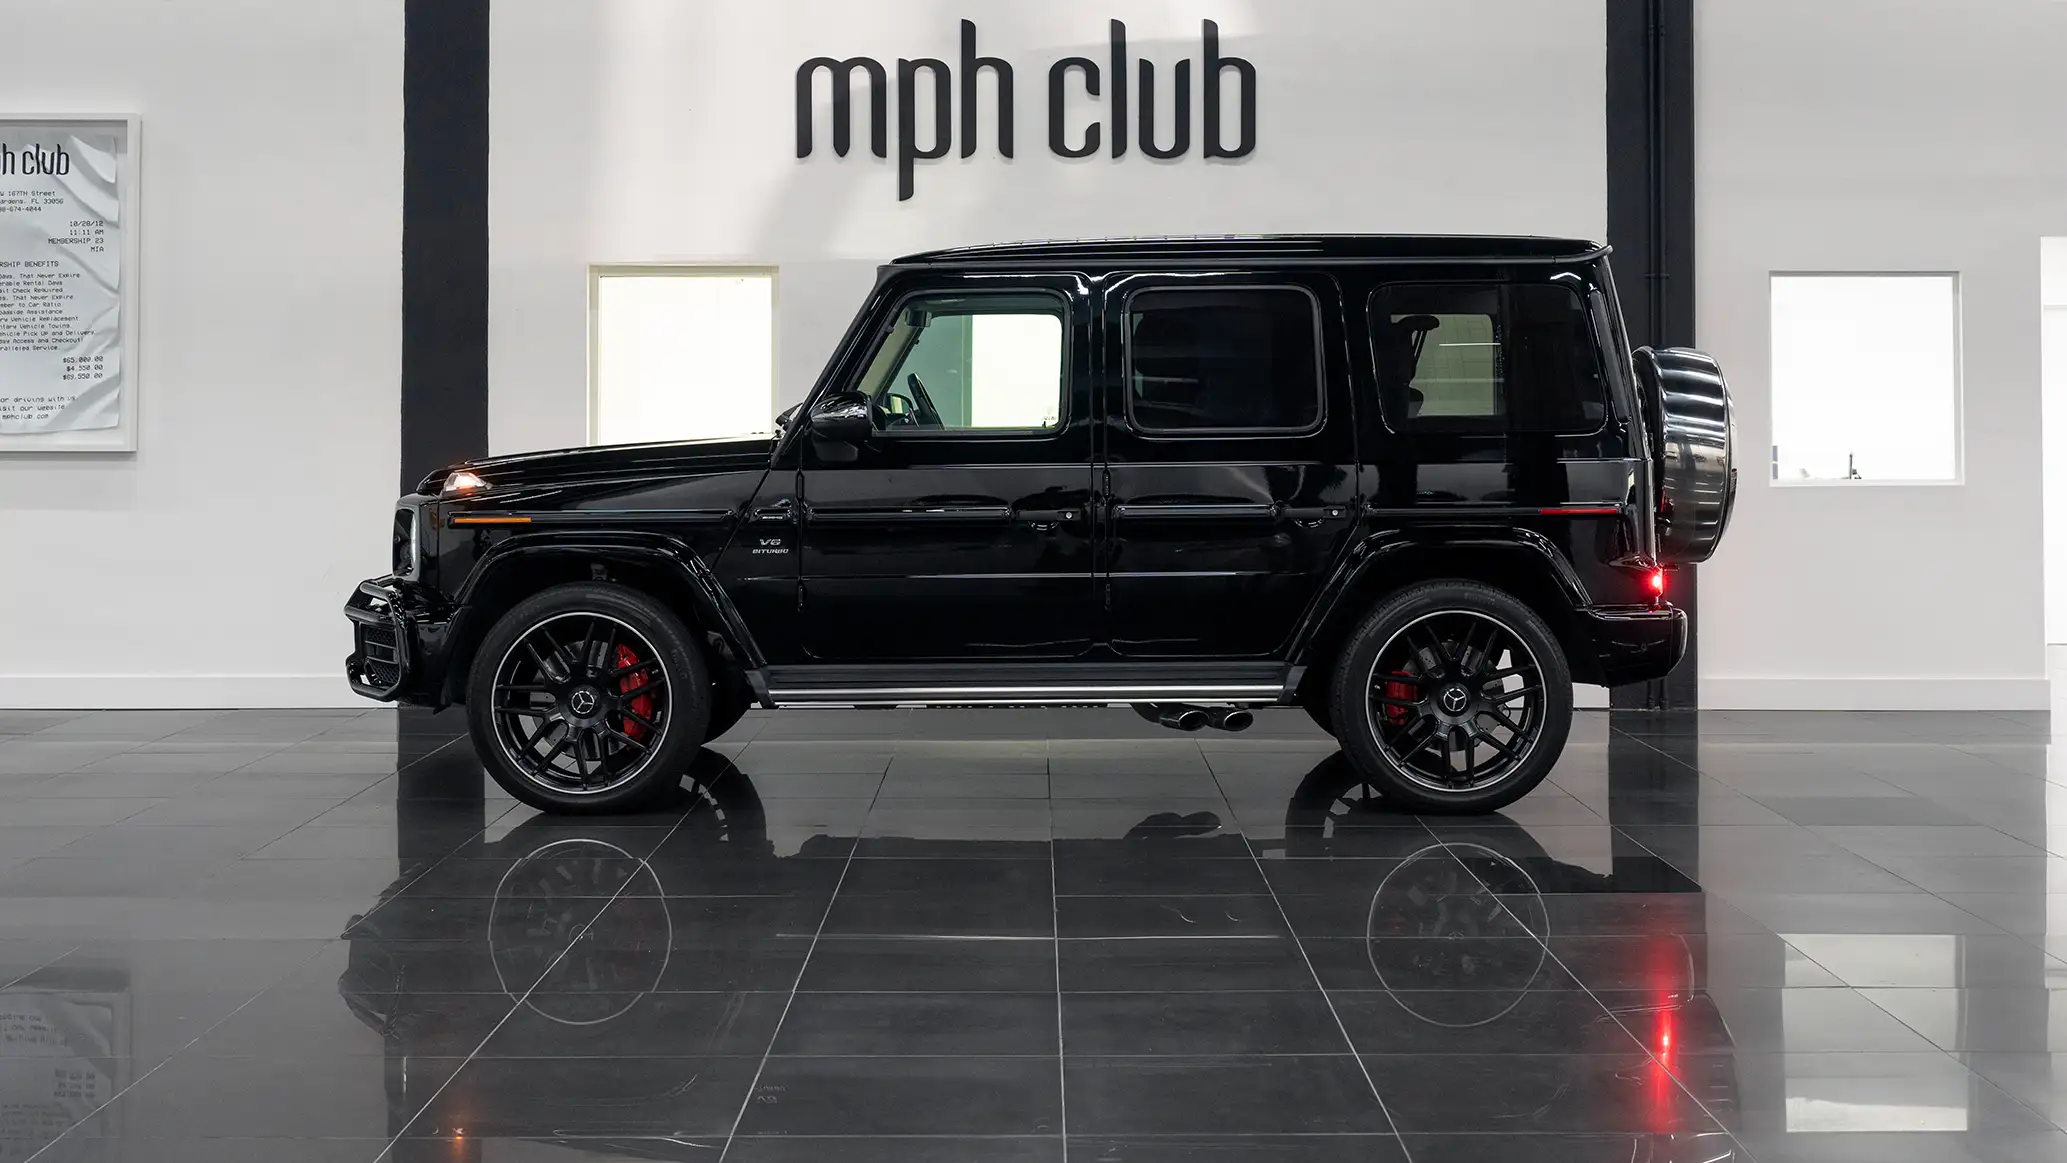 2020 black on white mercedes benz amg g63 for sale mph club 1